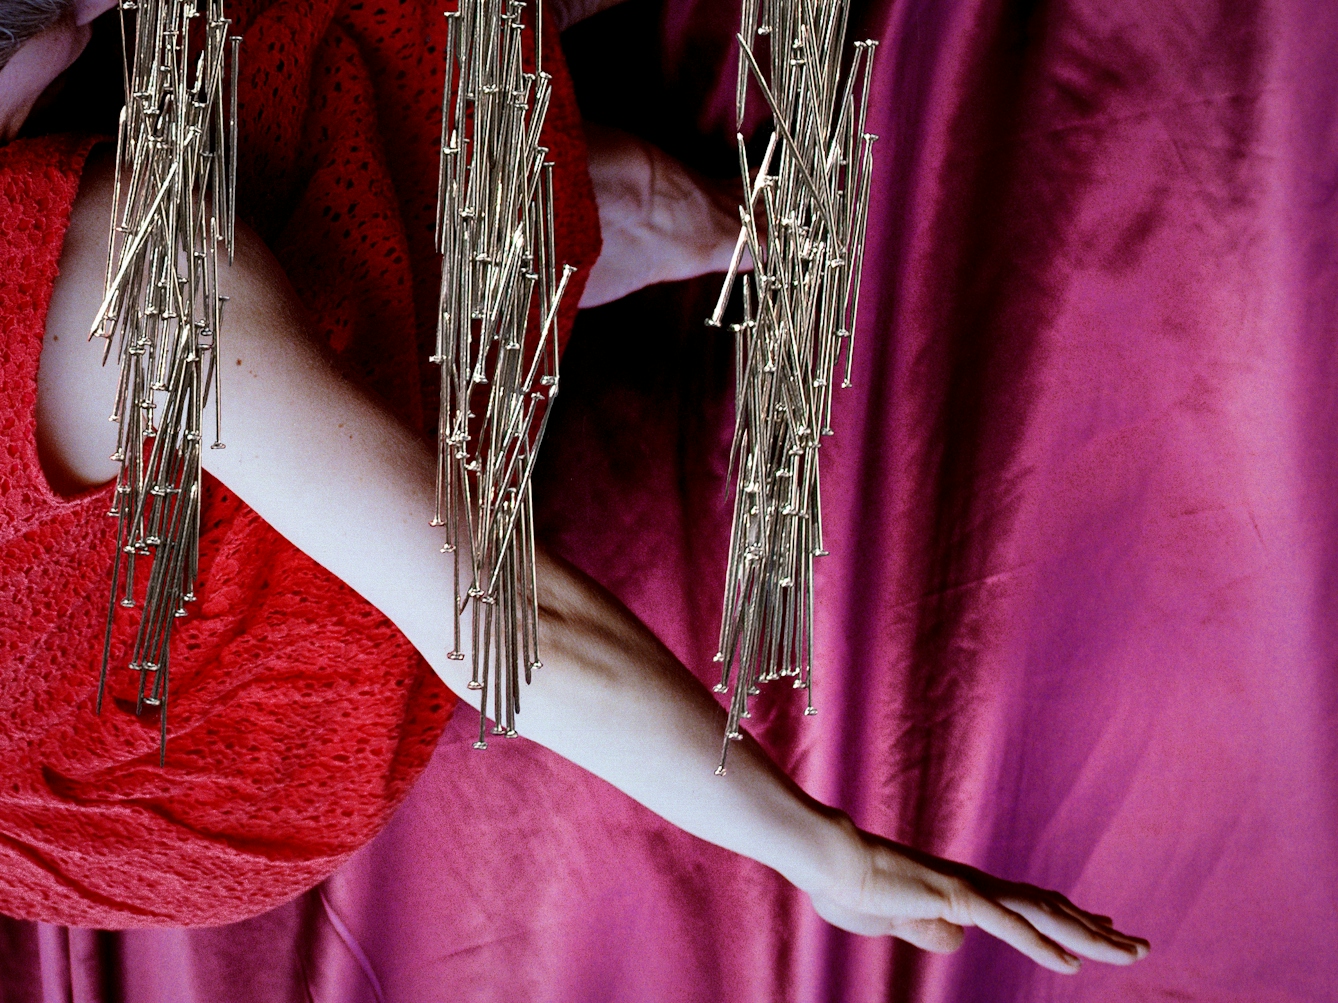 Detail from a larger artwork created with a colour photographic print of a female figure in a bright red dress, set against a purple and blue draped silk background. The detail shows the woman's outstretched arm and three of the pillars made out of dress pins.